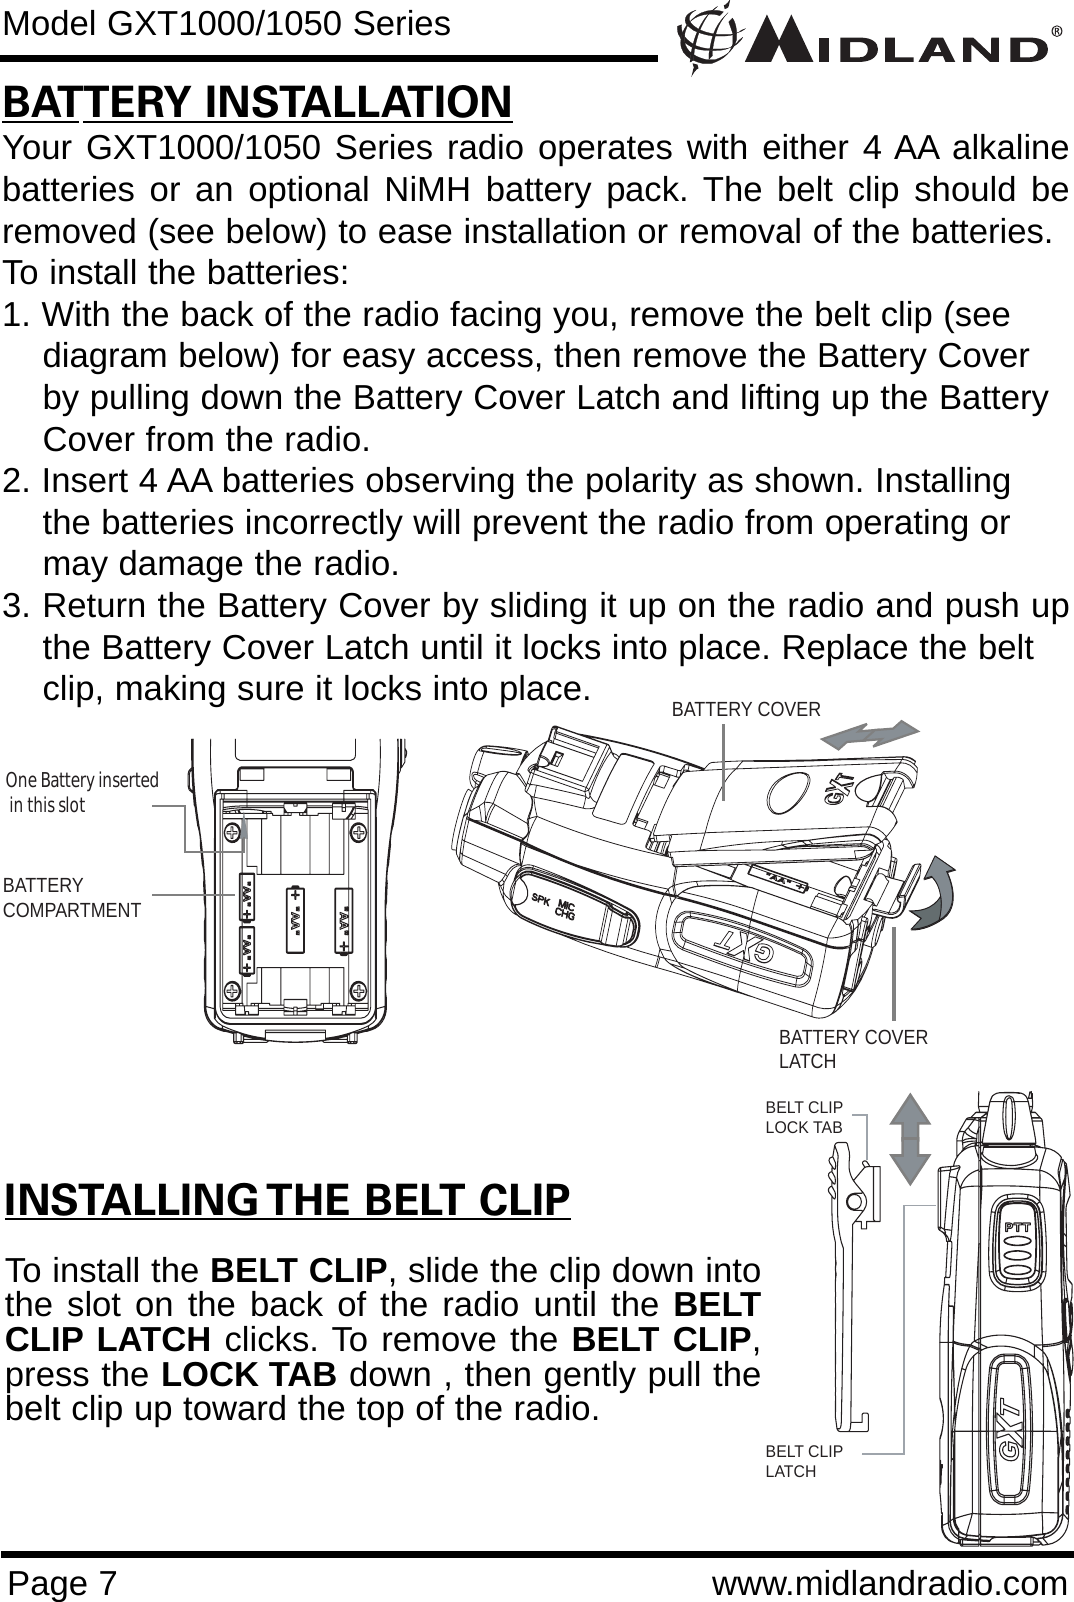 Page 7 www.midlandradio.comBATTERY INSTALLATIONYour GXT1000/1050 Series radio operates with either 4 AA alkalinebatteries or an optional NiMH battery pack. The belt clip should beremoved (see below) to ease installation or removal of the batteries. To install the batteries:1. With the back of the radio facing you, remove the belt clip (see    diagram below) for easy access, then remove the Battery Coverby pulling down the Battery Cover Latch and lifting up the Battery Cover from the radio.2. Insert 4 AA batteries observing the polarity as shown. Installingthe batteries incorrectly will prevent the radio from operating ormay damage the radio.3. Return the Battery Cover by sliding it up on the radio and push upthe Battery Cover Latch until it locks into place. Replace the belt clip, making sure it locks into place.Model GXT1000/1050 SeriesINSTALLING THE BELT CLIPTo install the BELT CLIP, slide the clip down intothe slot on the back of the radio until the BELTCLIP LATCH clicks. To remove the BELT CLIP,press the LOCK TAB down , then gently pull thebelt clip up toward the top of the radio.BATTERYCOMPARTMENTOne Battery inserted  in this slotBATTERY COVERBATTERY COVERLATCHBELT CLIPLOCK TABBELT CLIP LATCH